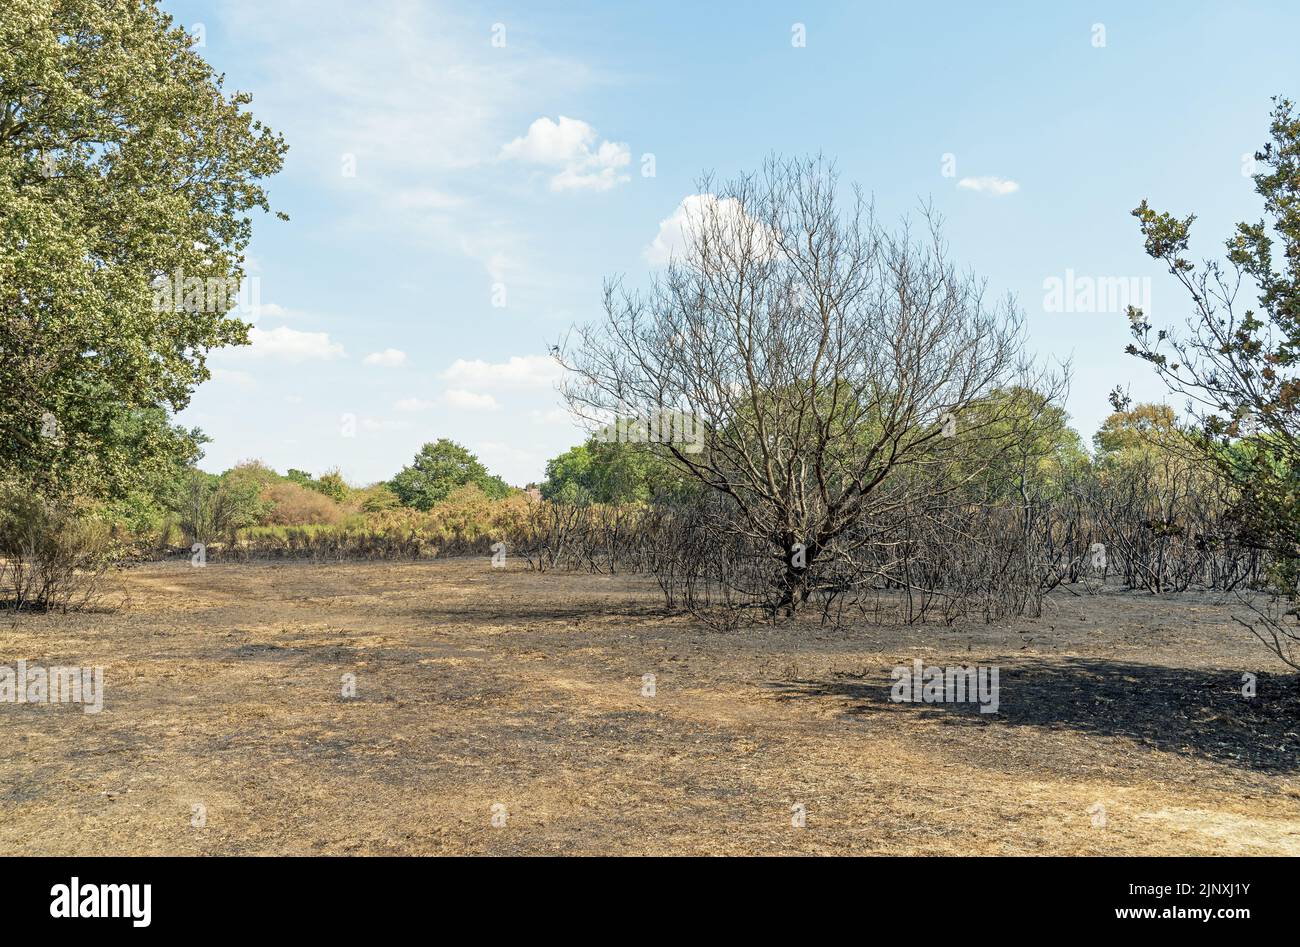 Burned tree and undergrowth at Hollow Ponds after a forest fire due to weeks of heatwave and drought in the summer. Focus on tree Stock Photo